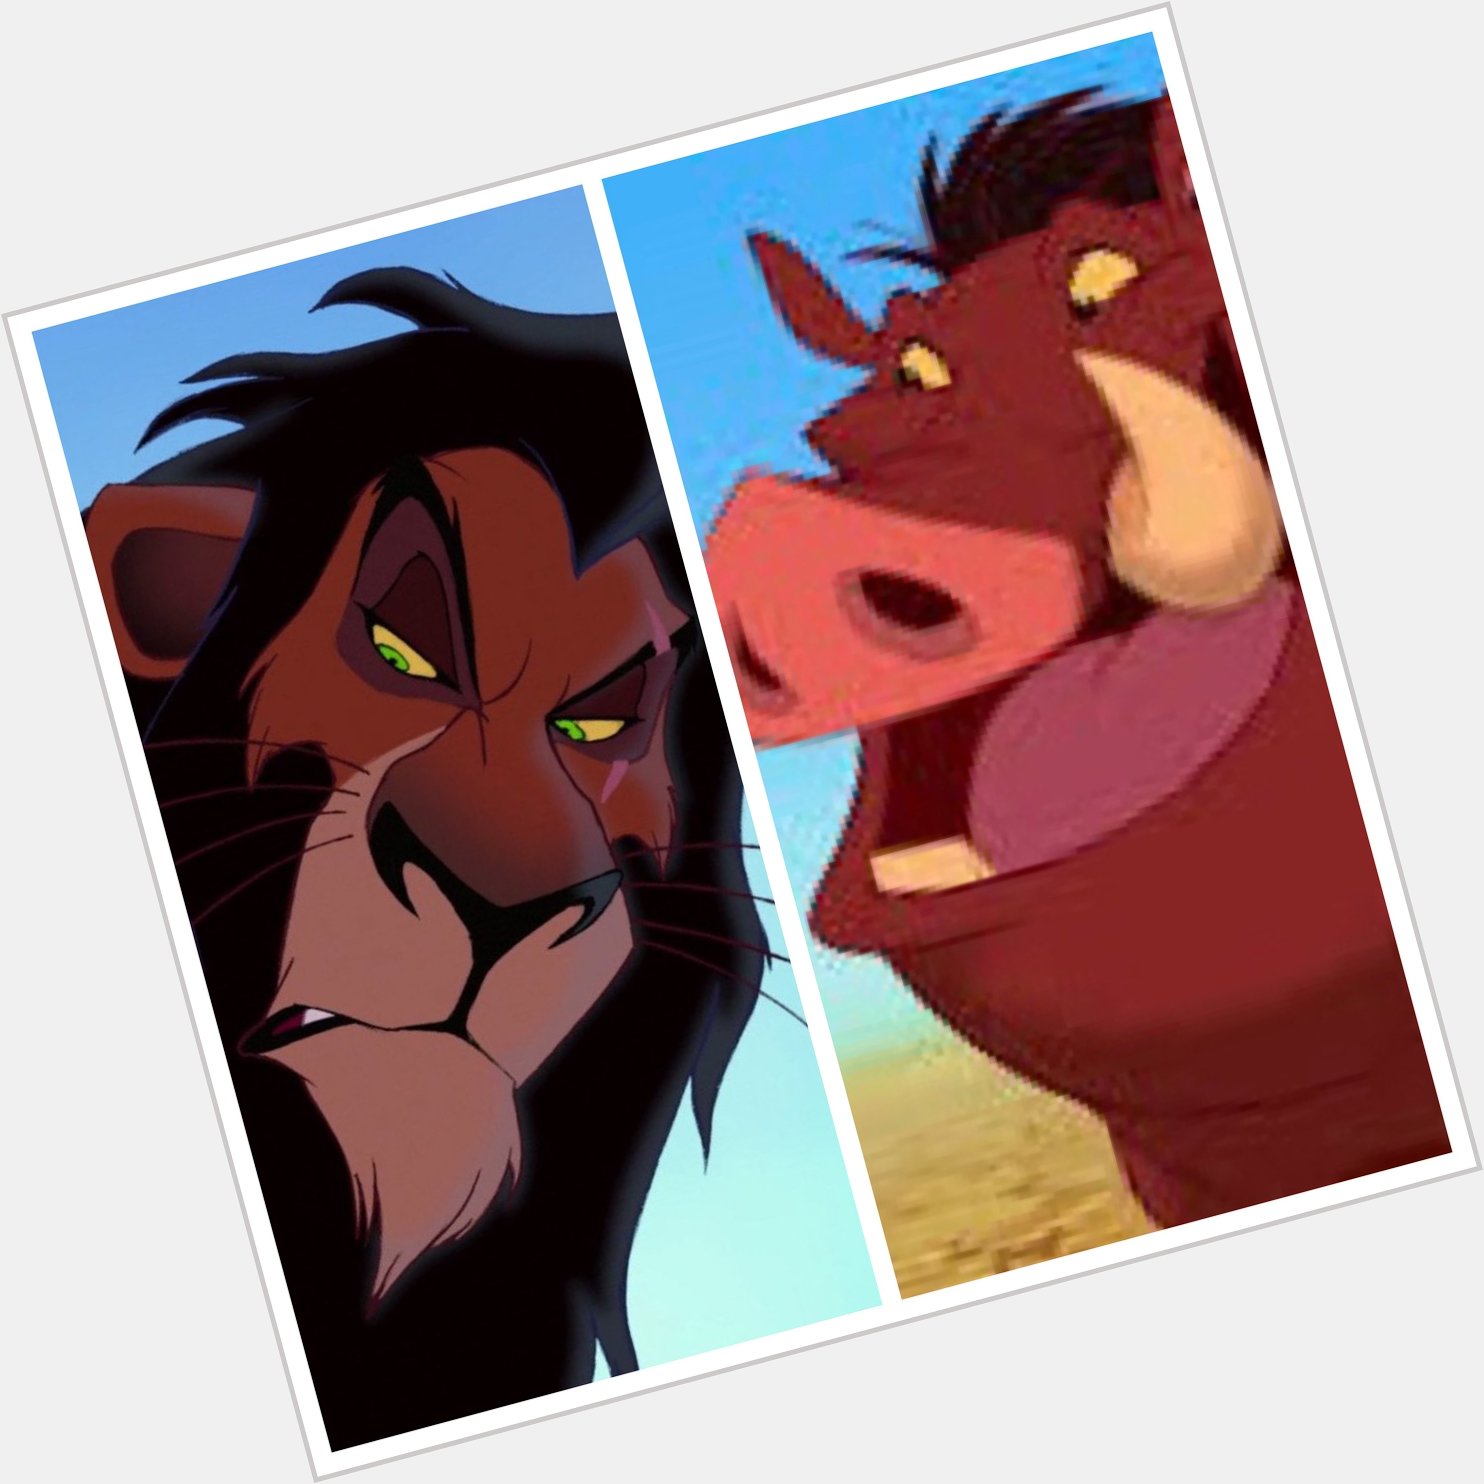 Happy Birthday to The Lion King stars Jeremy Irons and Ernie Sabella! 